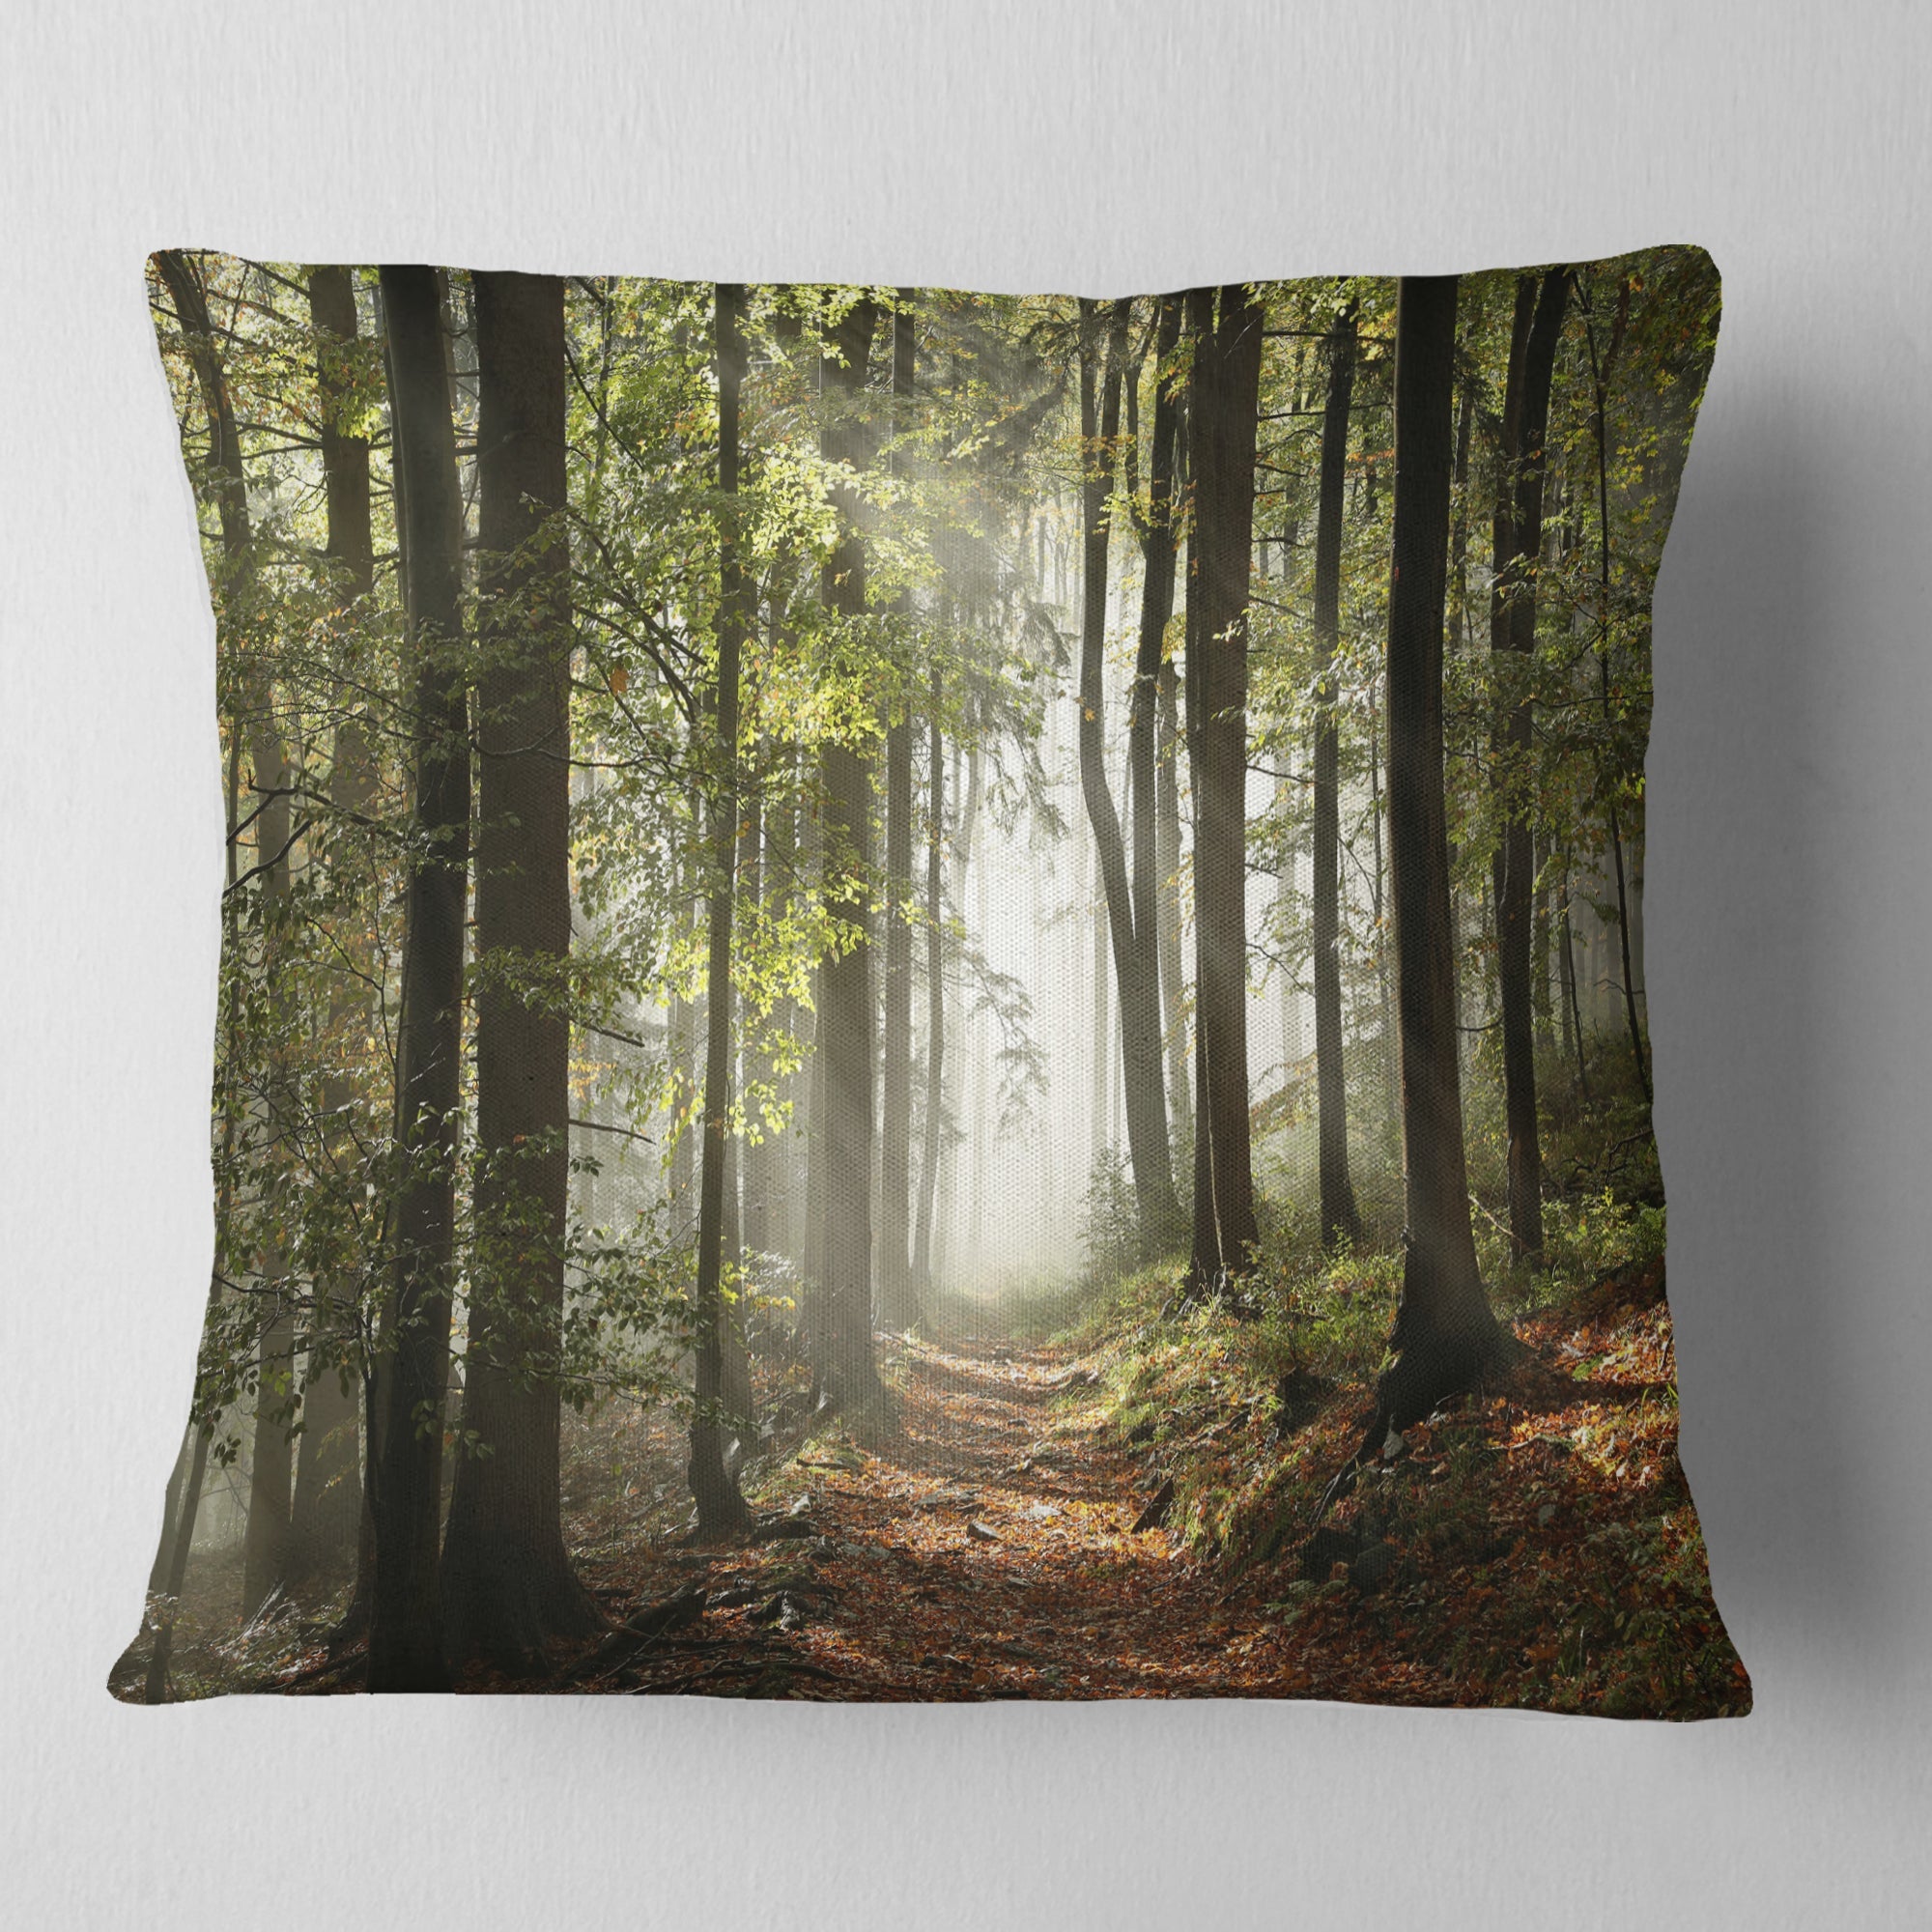 Green Fall Forest with Sun Rays - Landscape Photography Throw Pillow